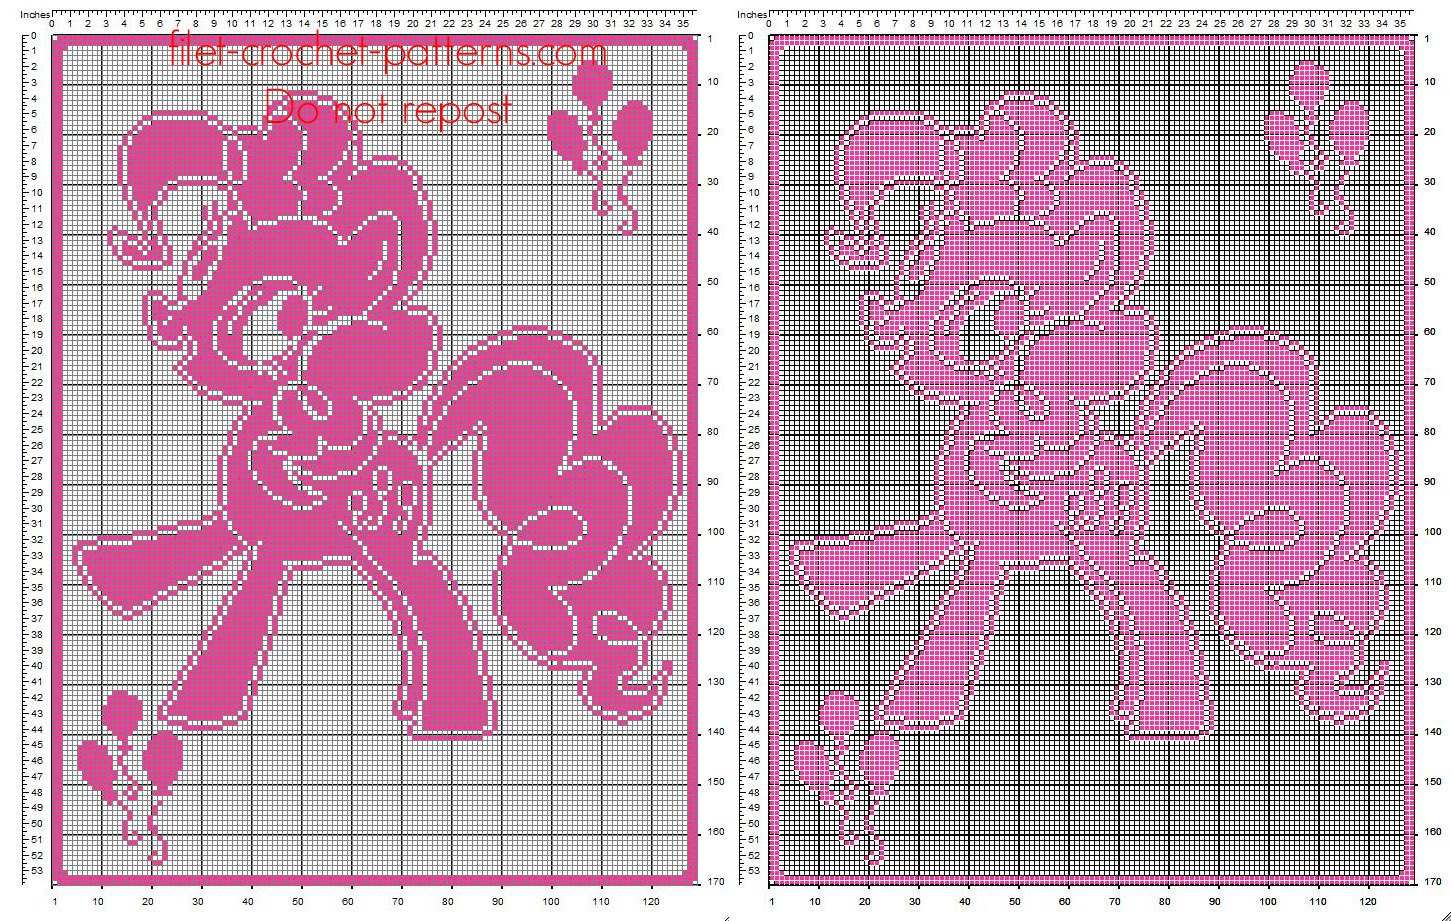 Filet crochet baby blanket with Pinkie Pie from My Little Pony free pattern download